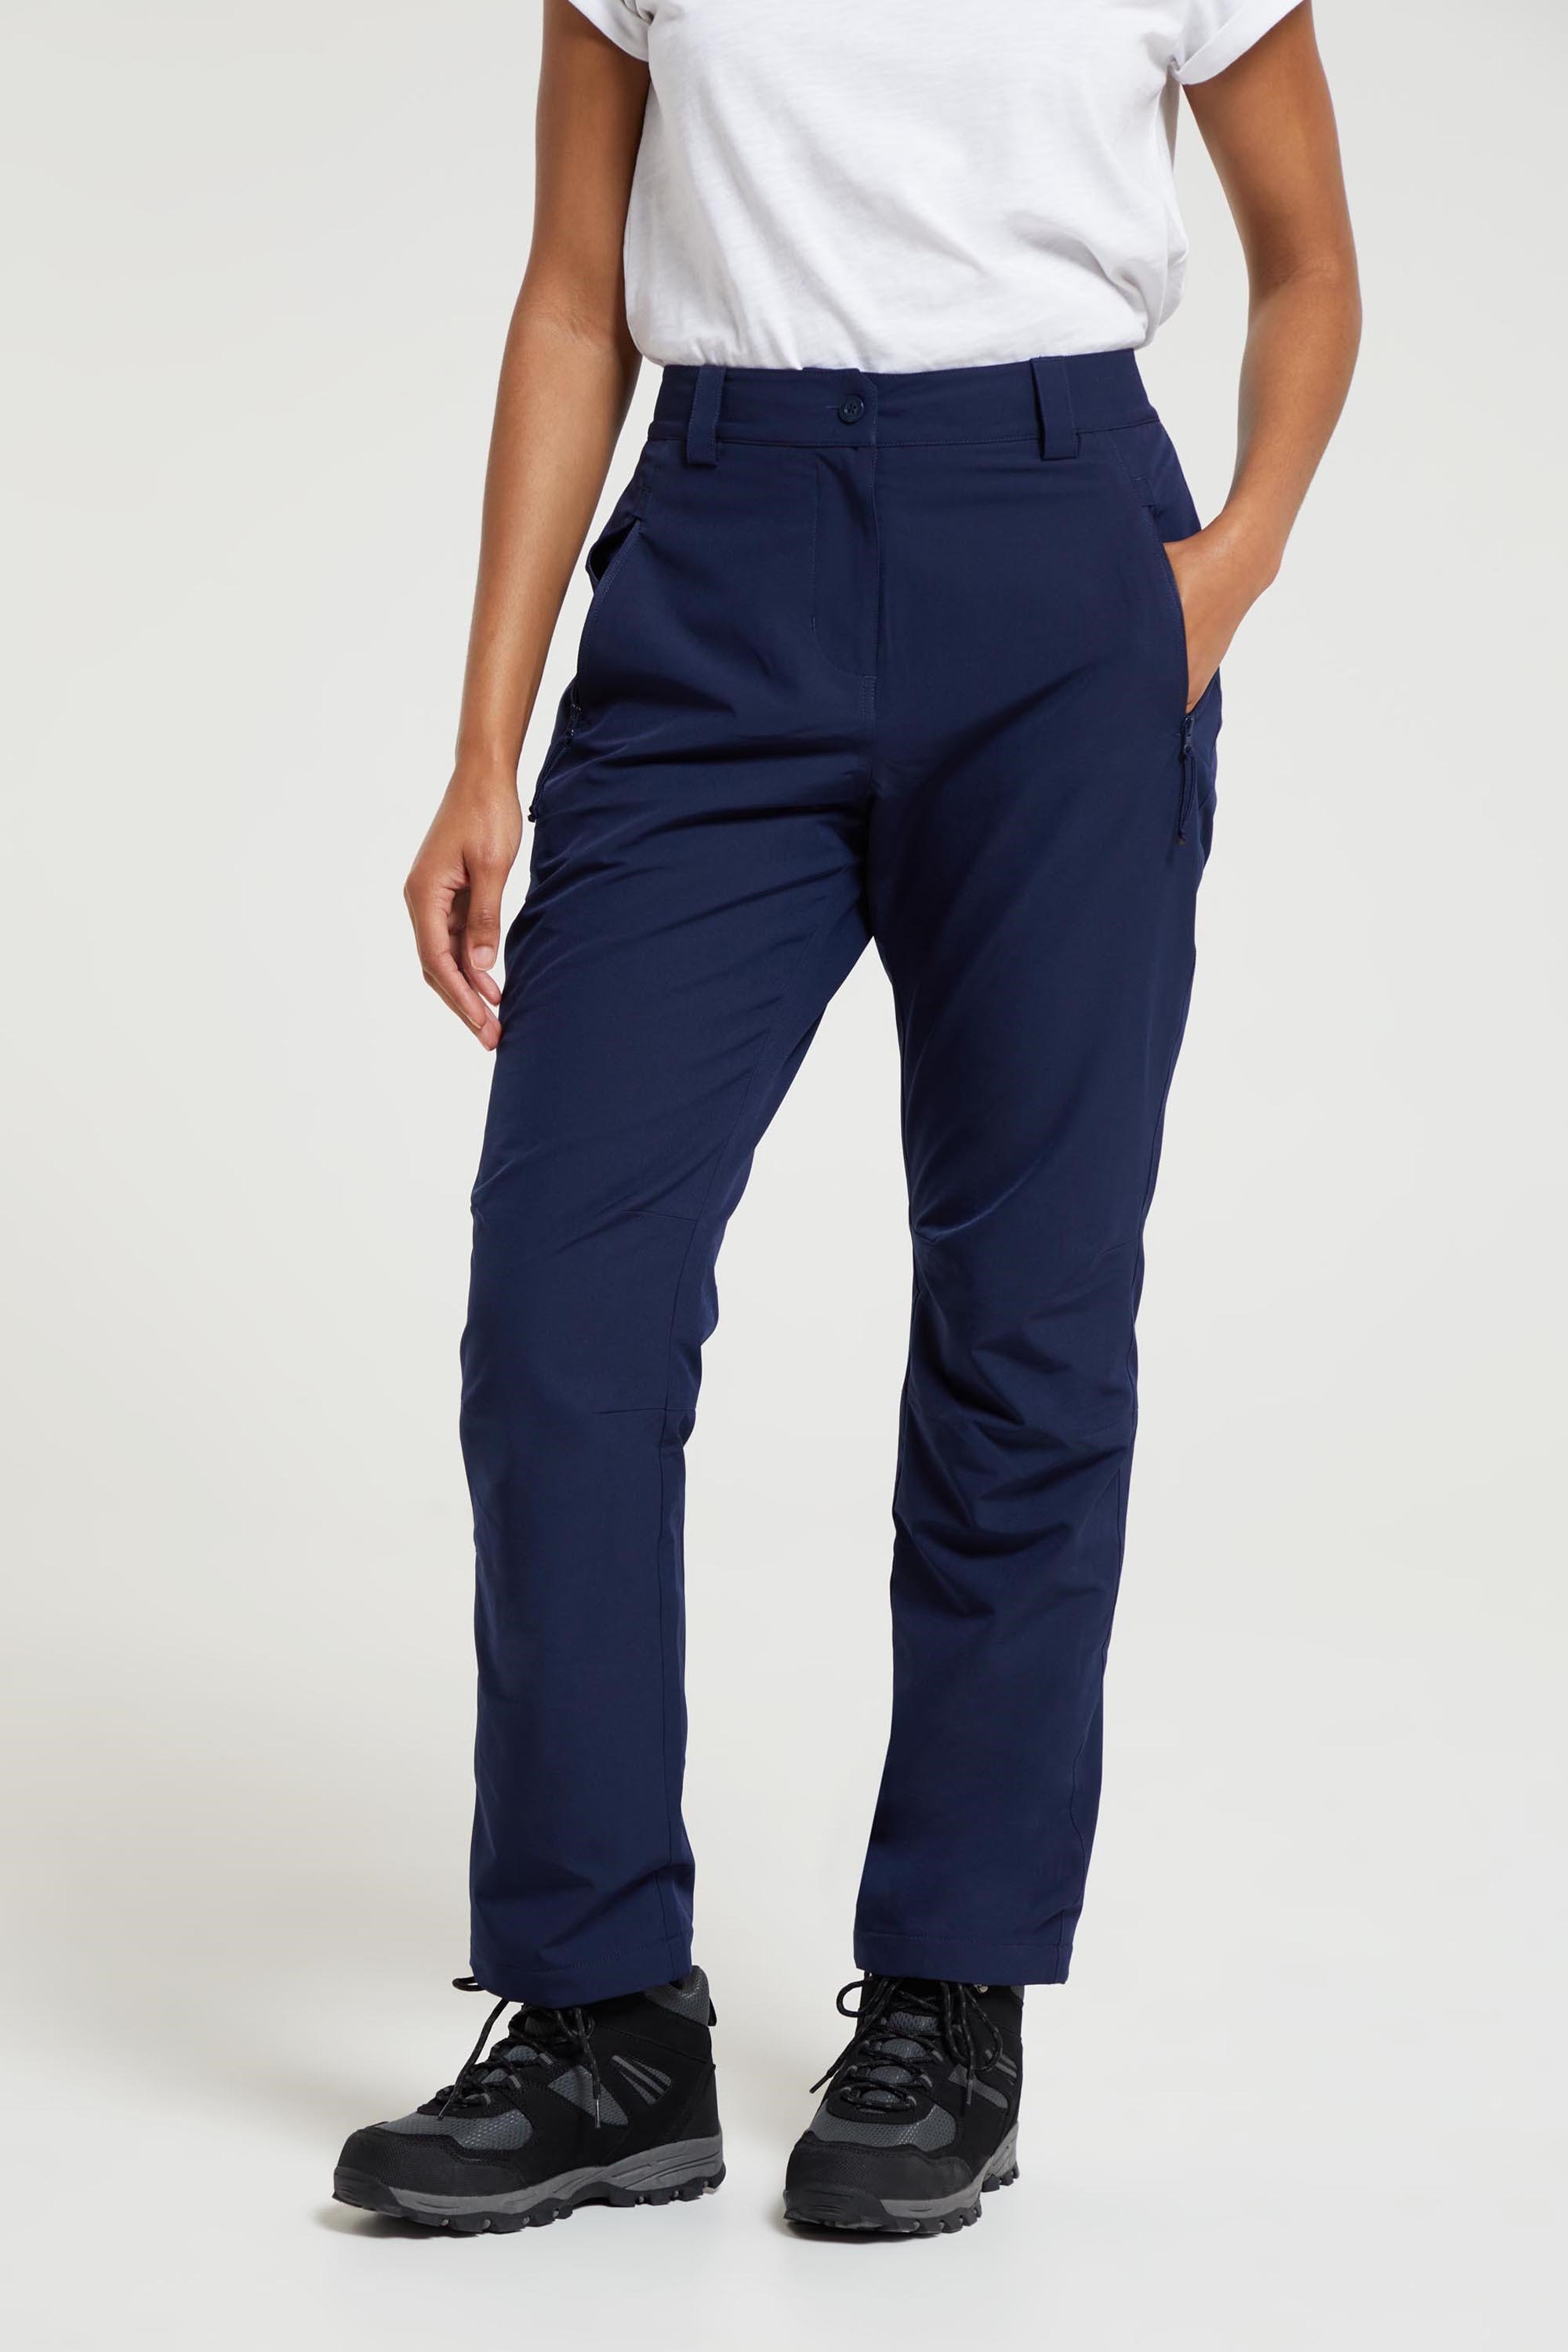 Arctic II Fleece Lined Stretch Womens Trousers - Navy